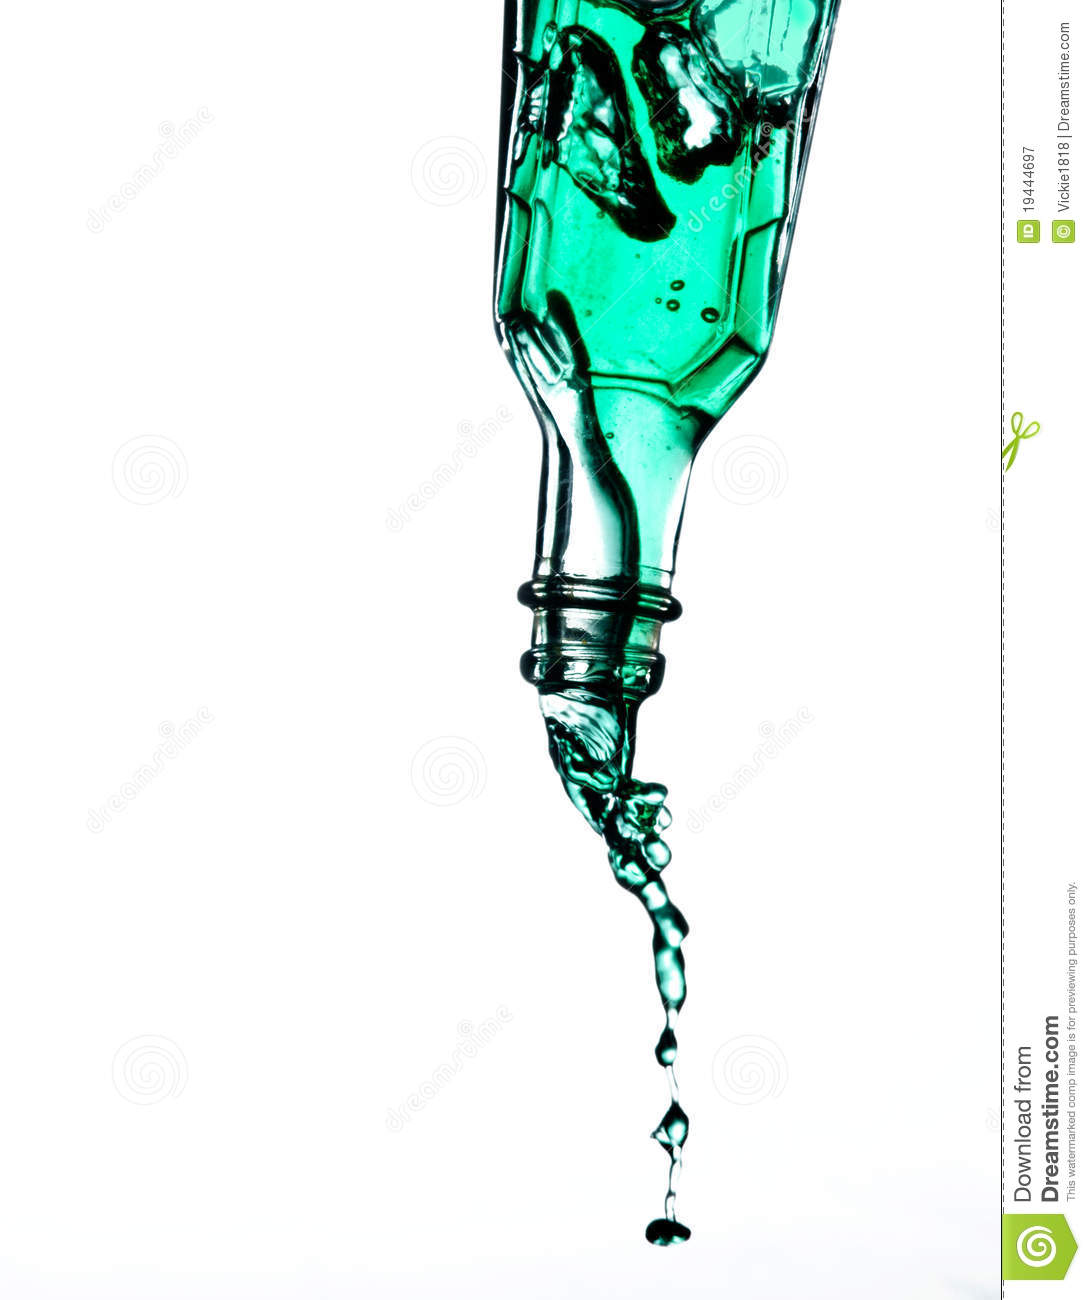 Bottle Pouring Liquid Royalty Free Stock Photography   Image  19444697